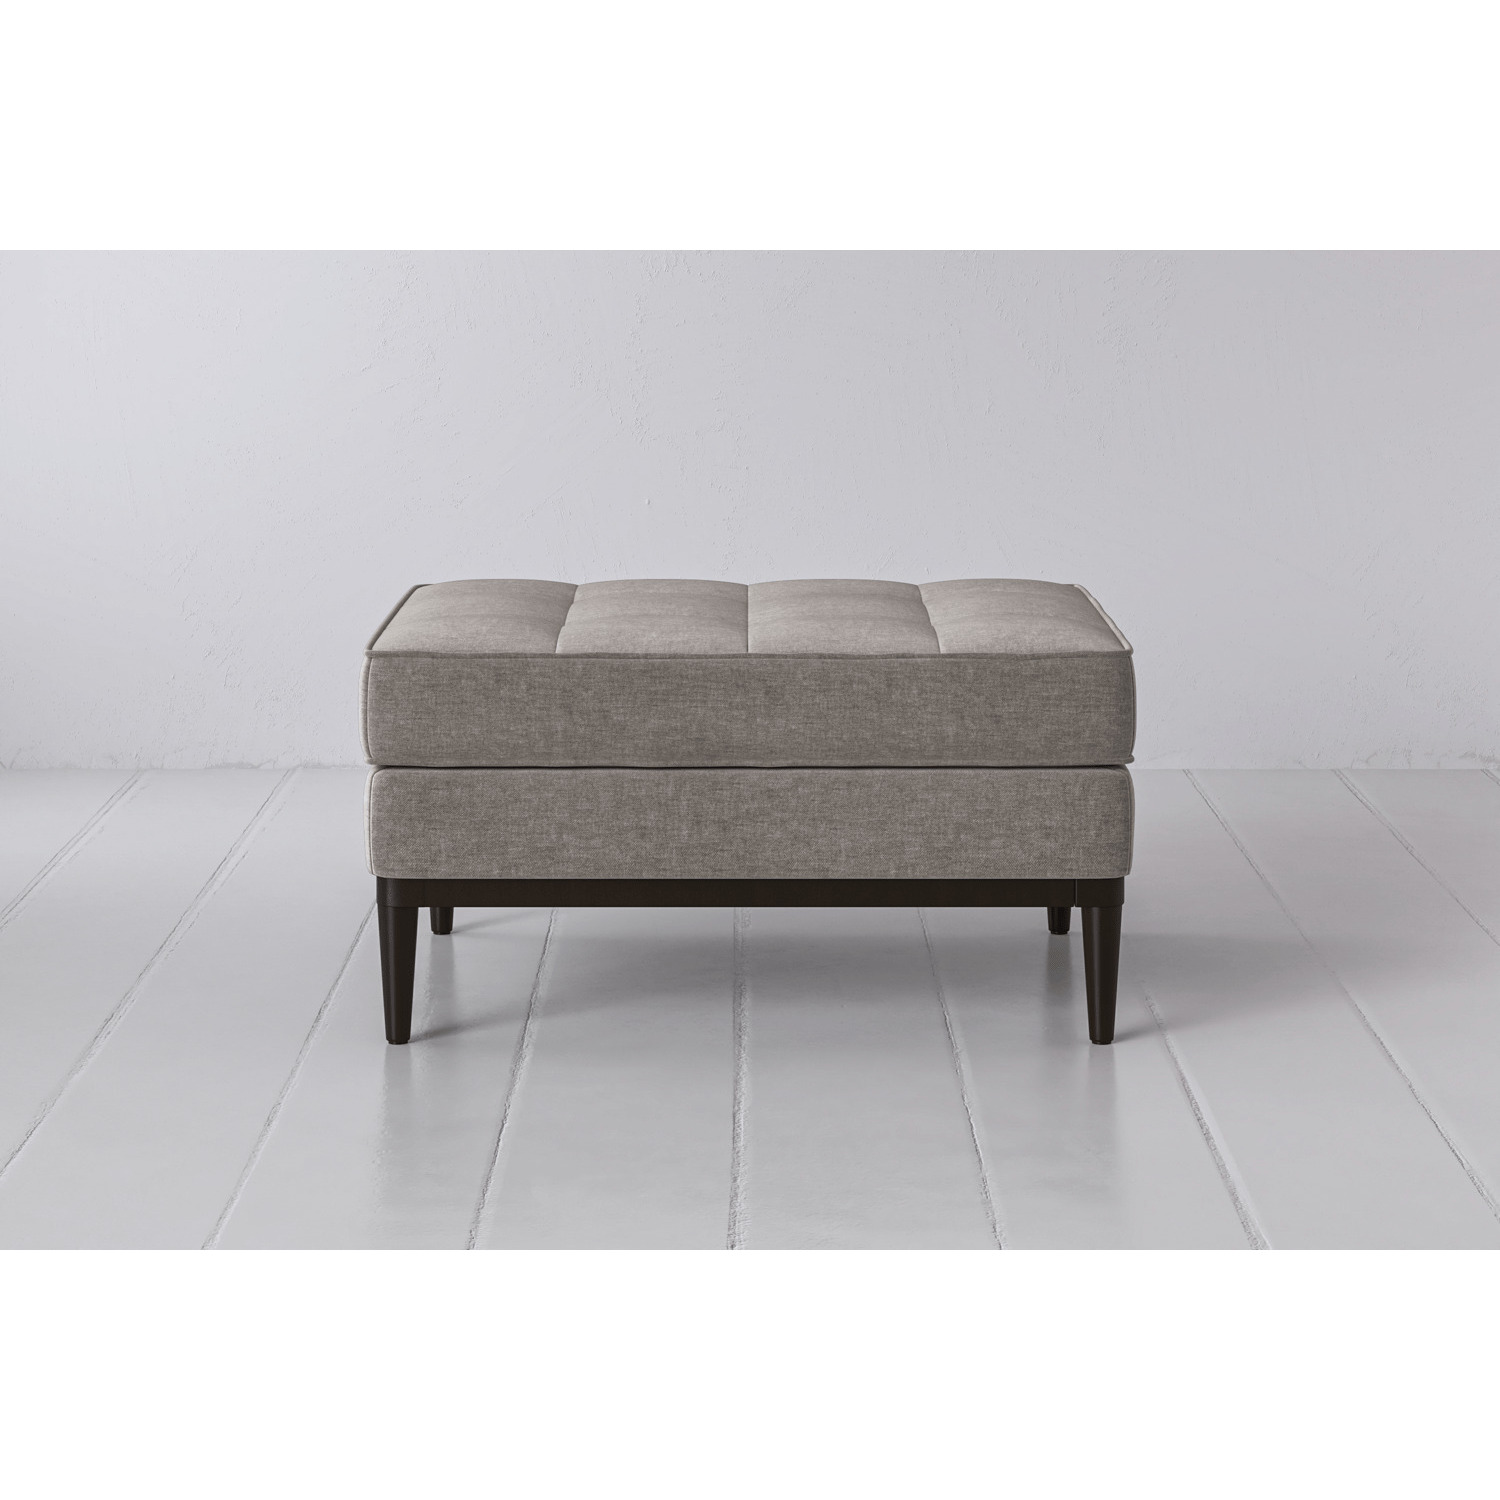 Chenille Ottoman from Swyft - Cloud - Model 02 - Quick Delivery